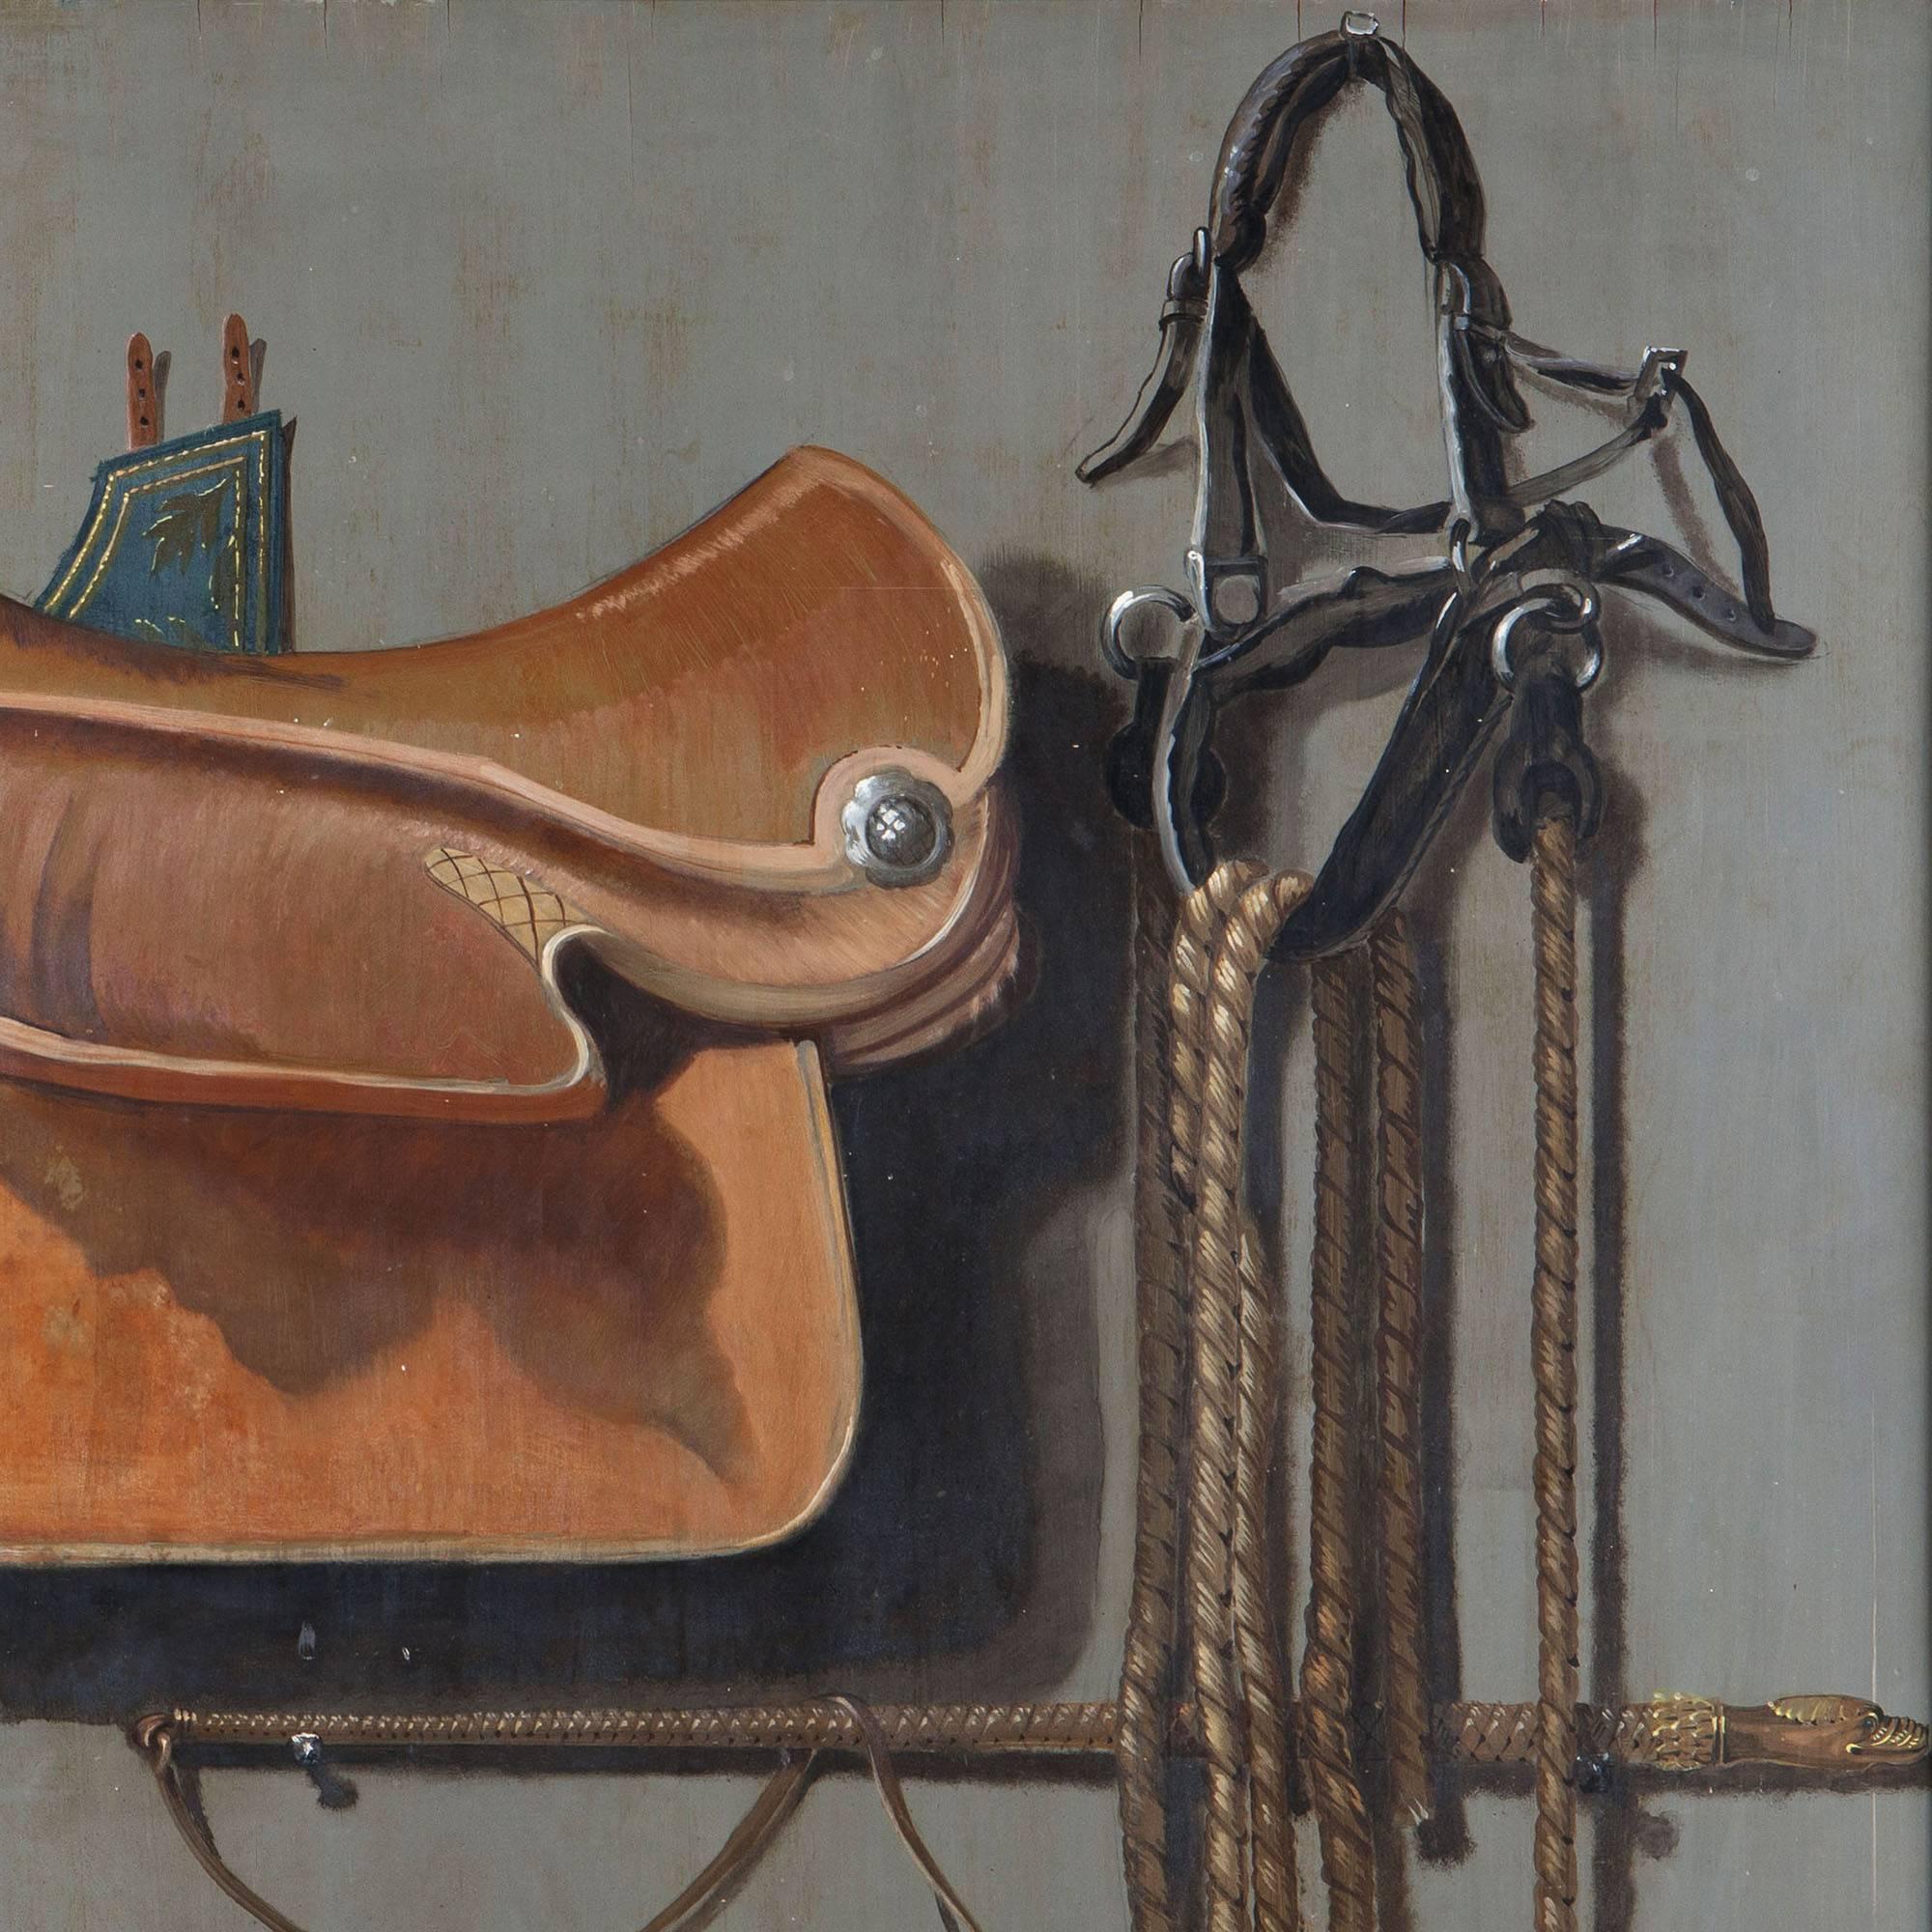 A highly unusual Mid-Century large-scale painting on panel of a Trompe l'oeil of stabile equipment. In the manner of 17th century Trompe l'oeil artist J. Biltius.

It has been suggested that this panel may have been created as an advertisement or